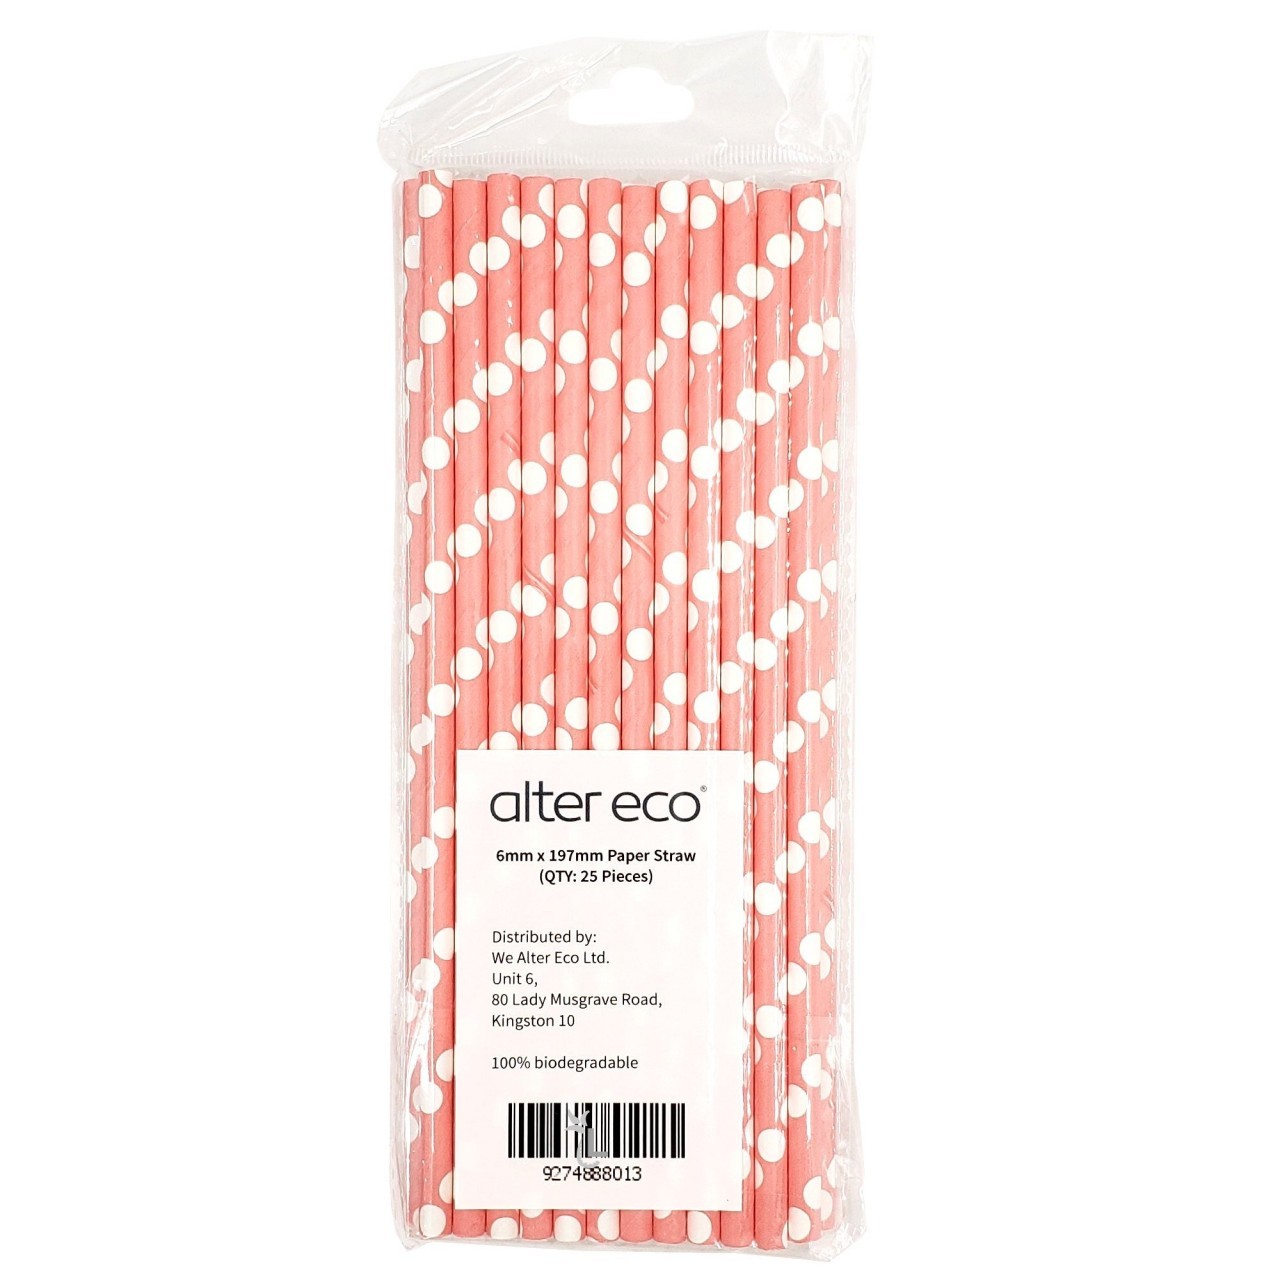 ALTER ECO PAPER STRAW 6x197mm 25ct